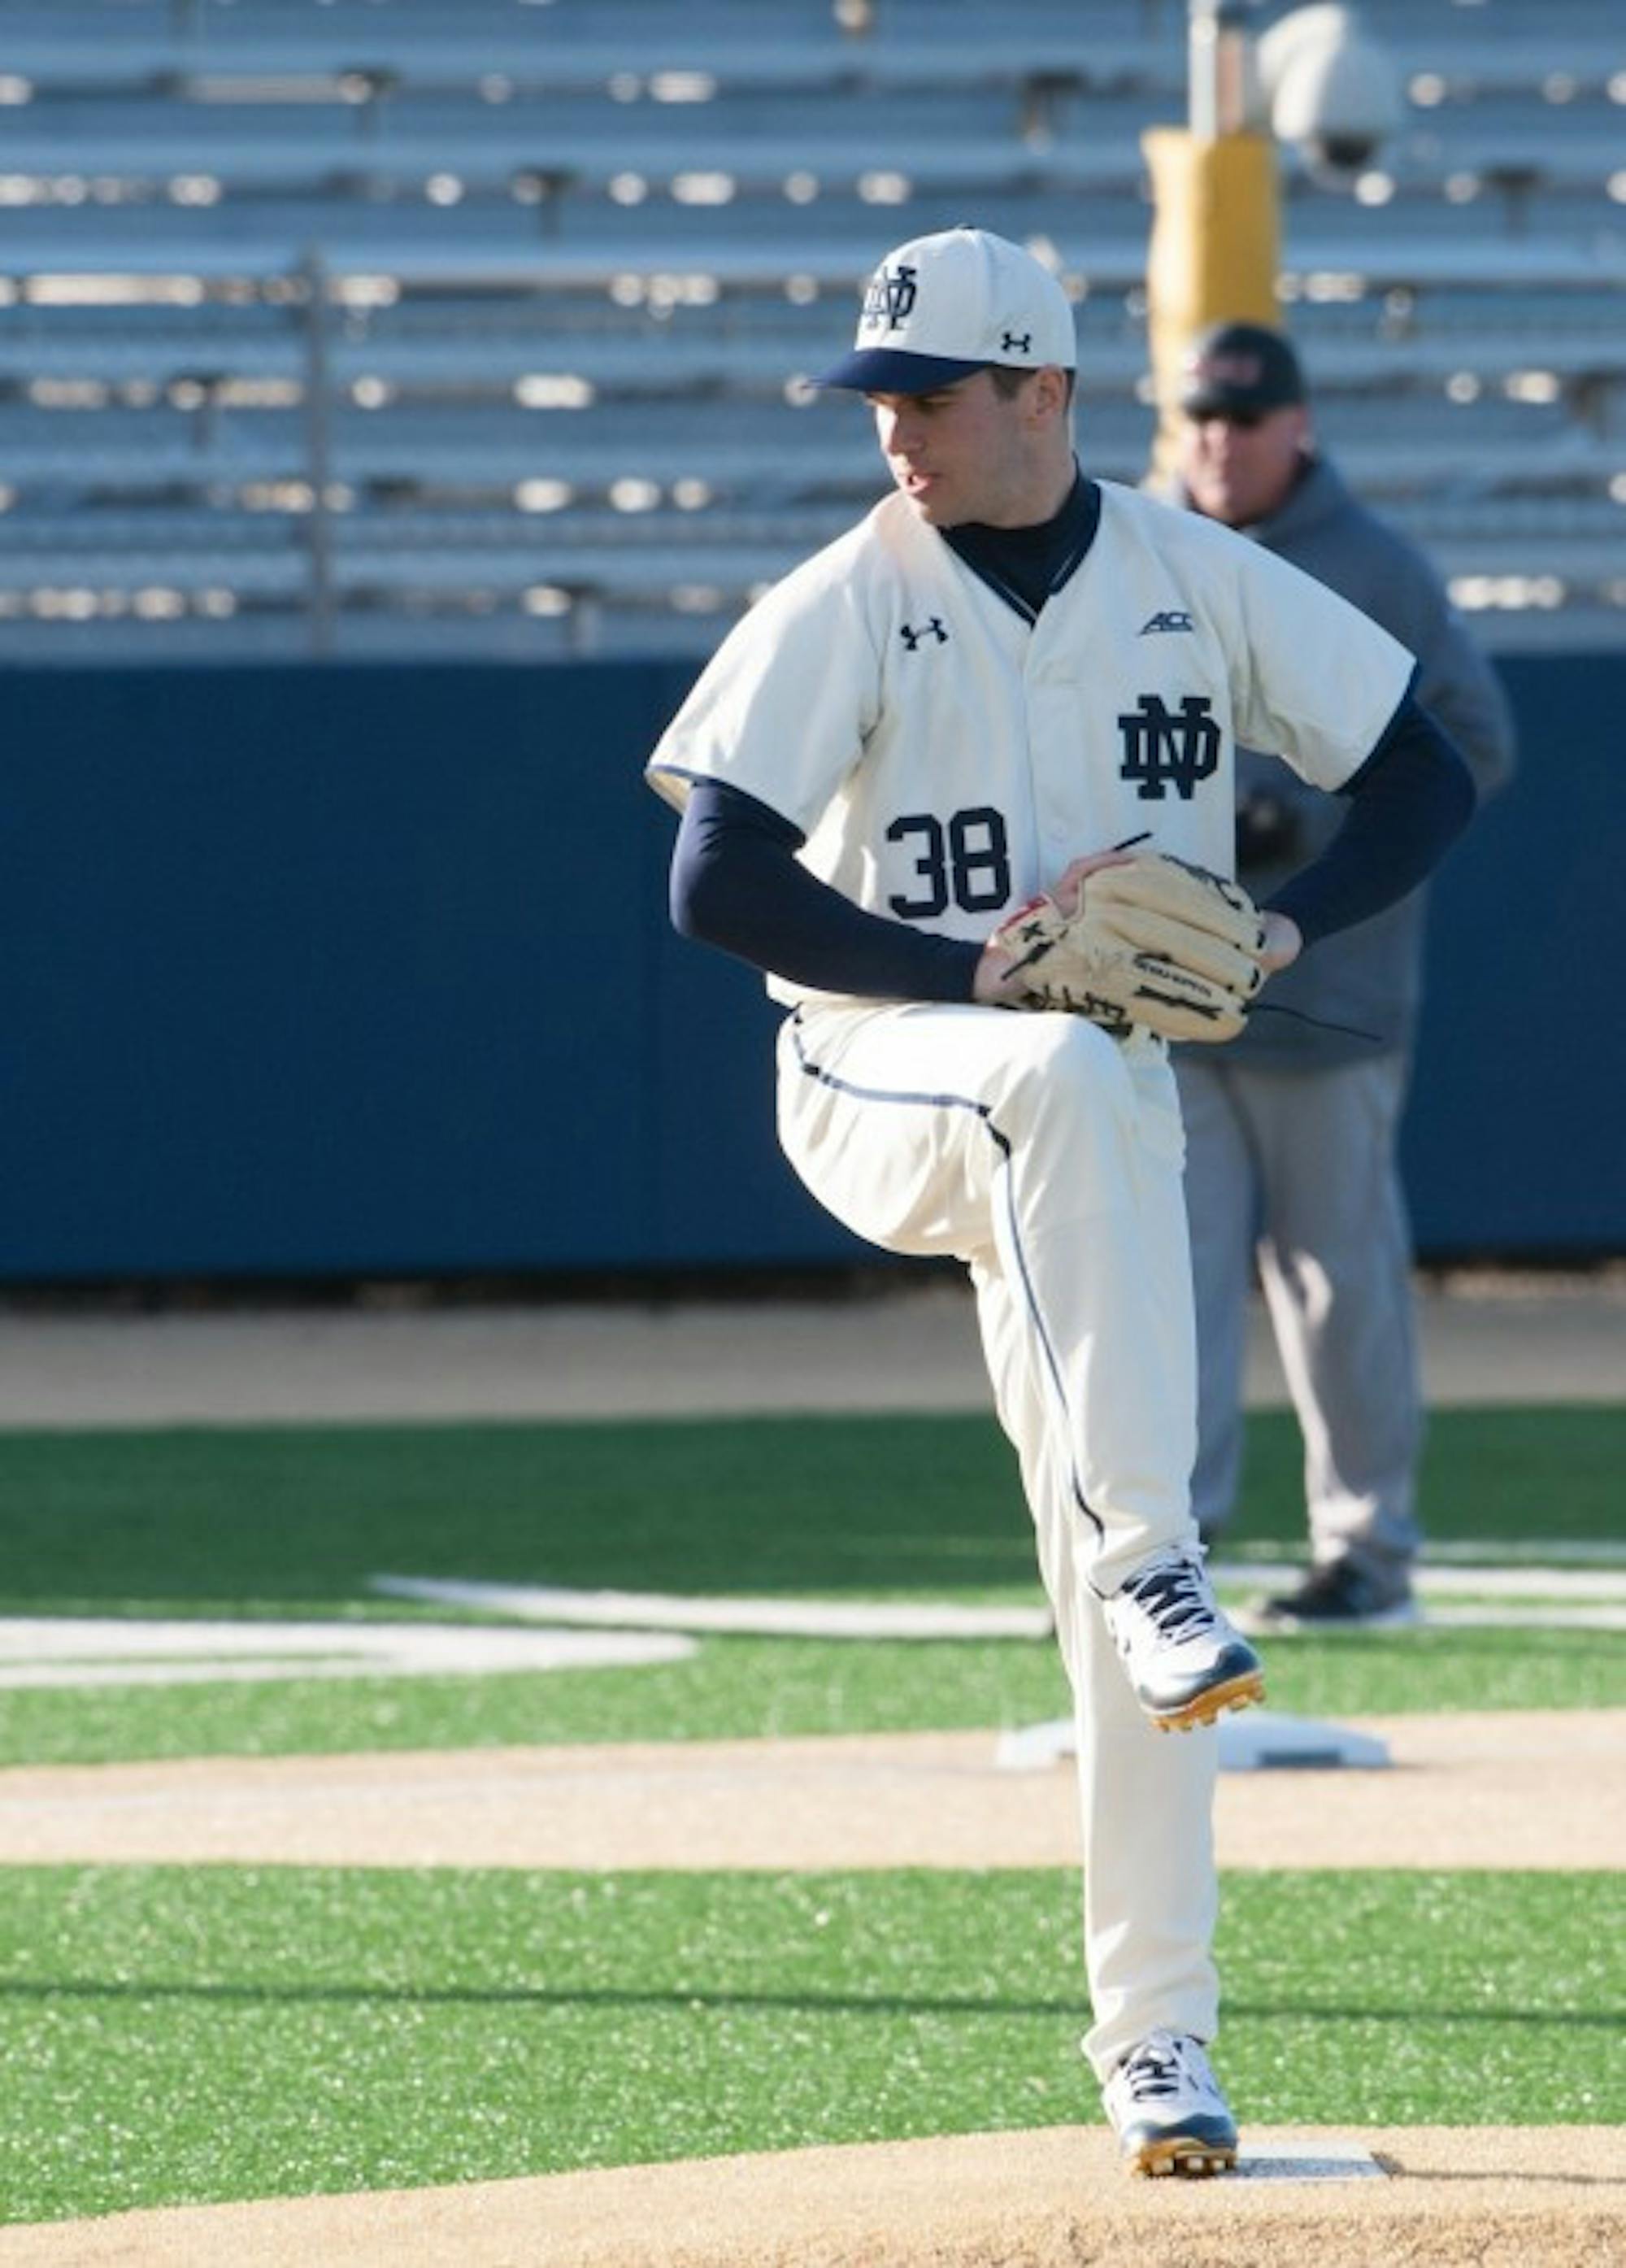 Irish senior southpaw Scott Tully prepares to throw a pitch during Notre Dame's 12-1 win over Northern Illinois on March 21 at Frank Eck Stadium.